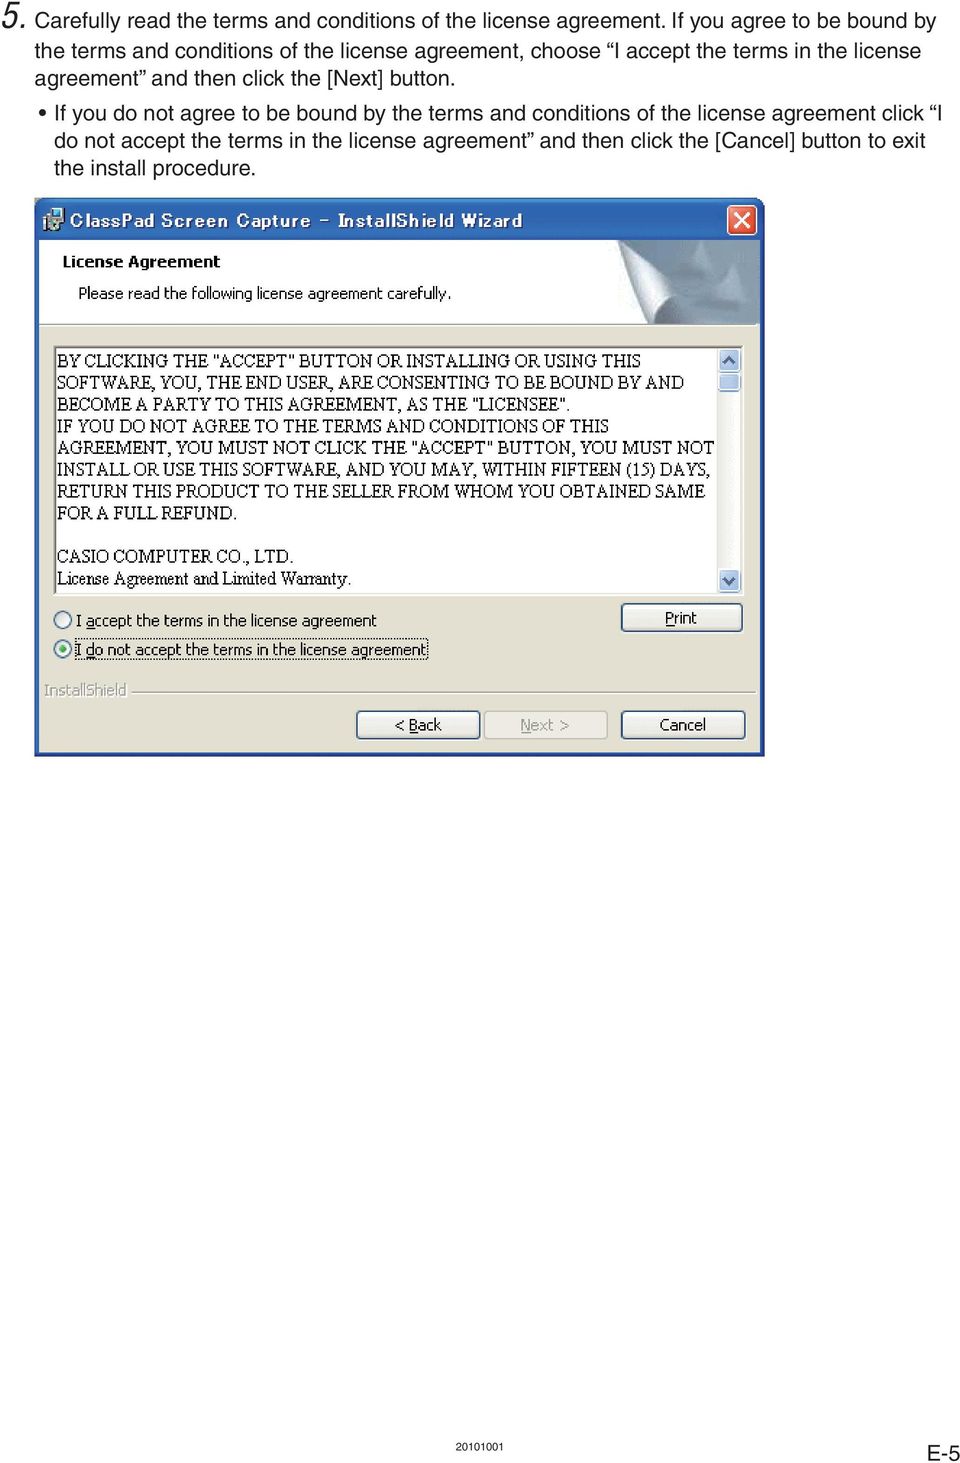 license agreement and then click the [Next] button.